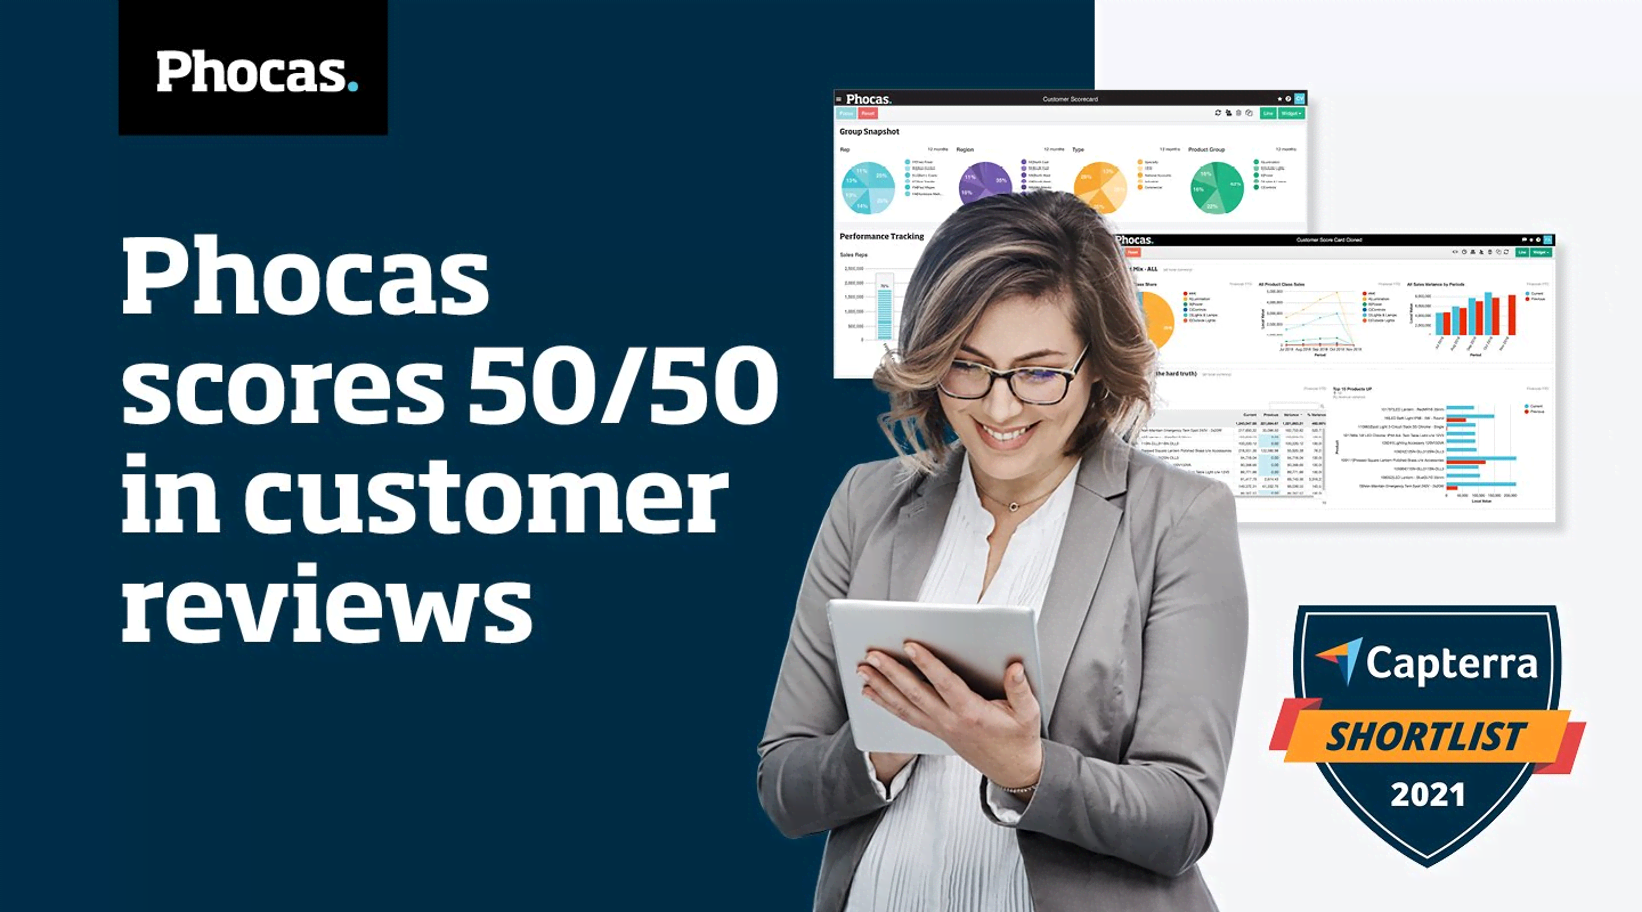 Phocas rates 50/50 in Capterra's top data analysis tools of 2021